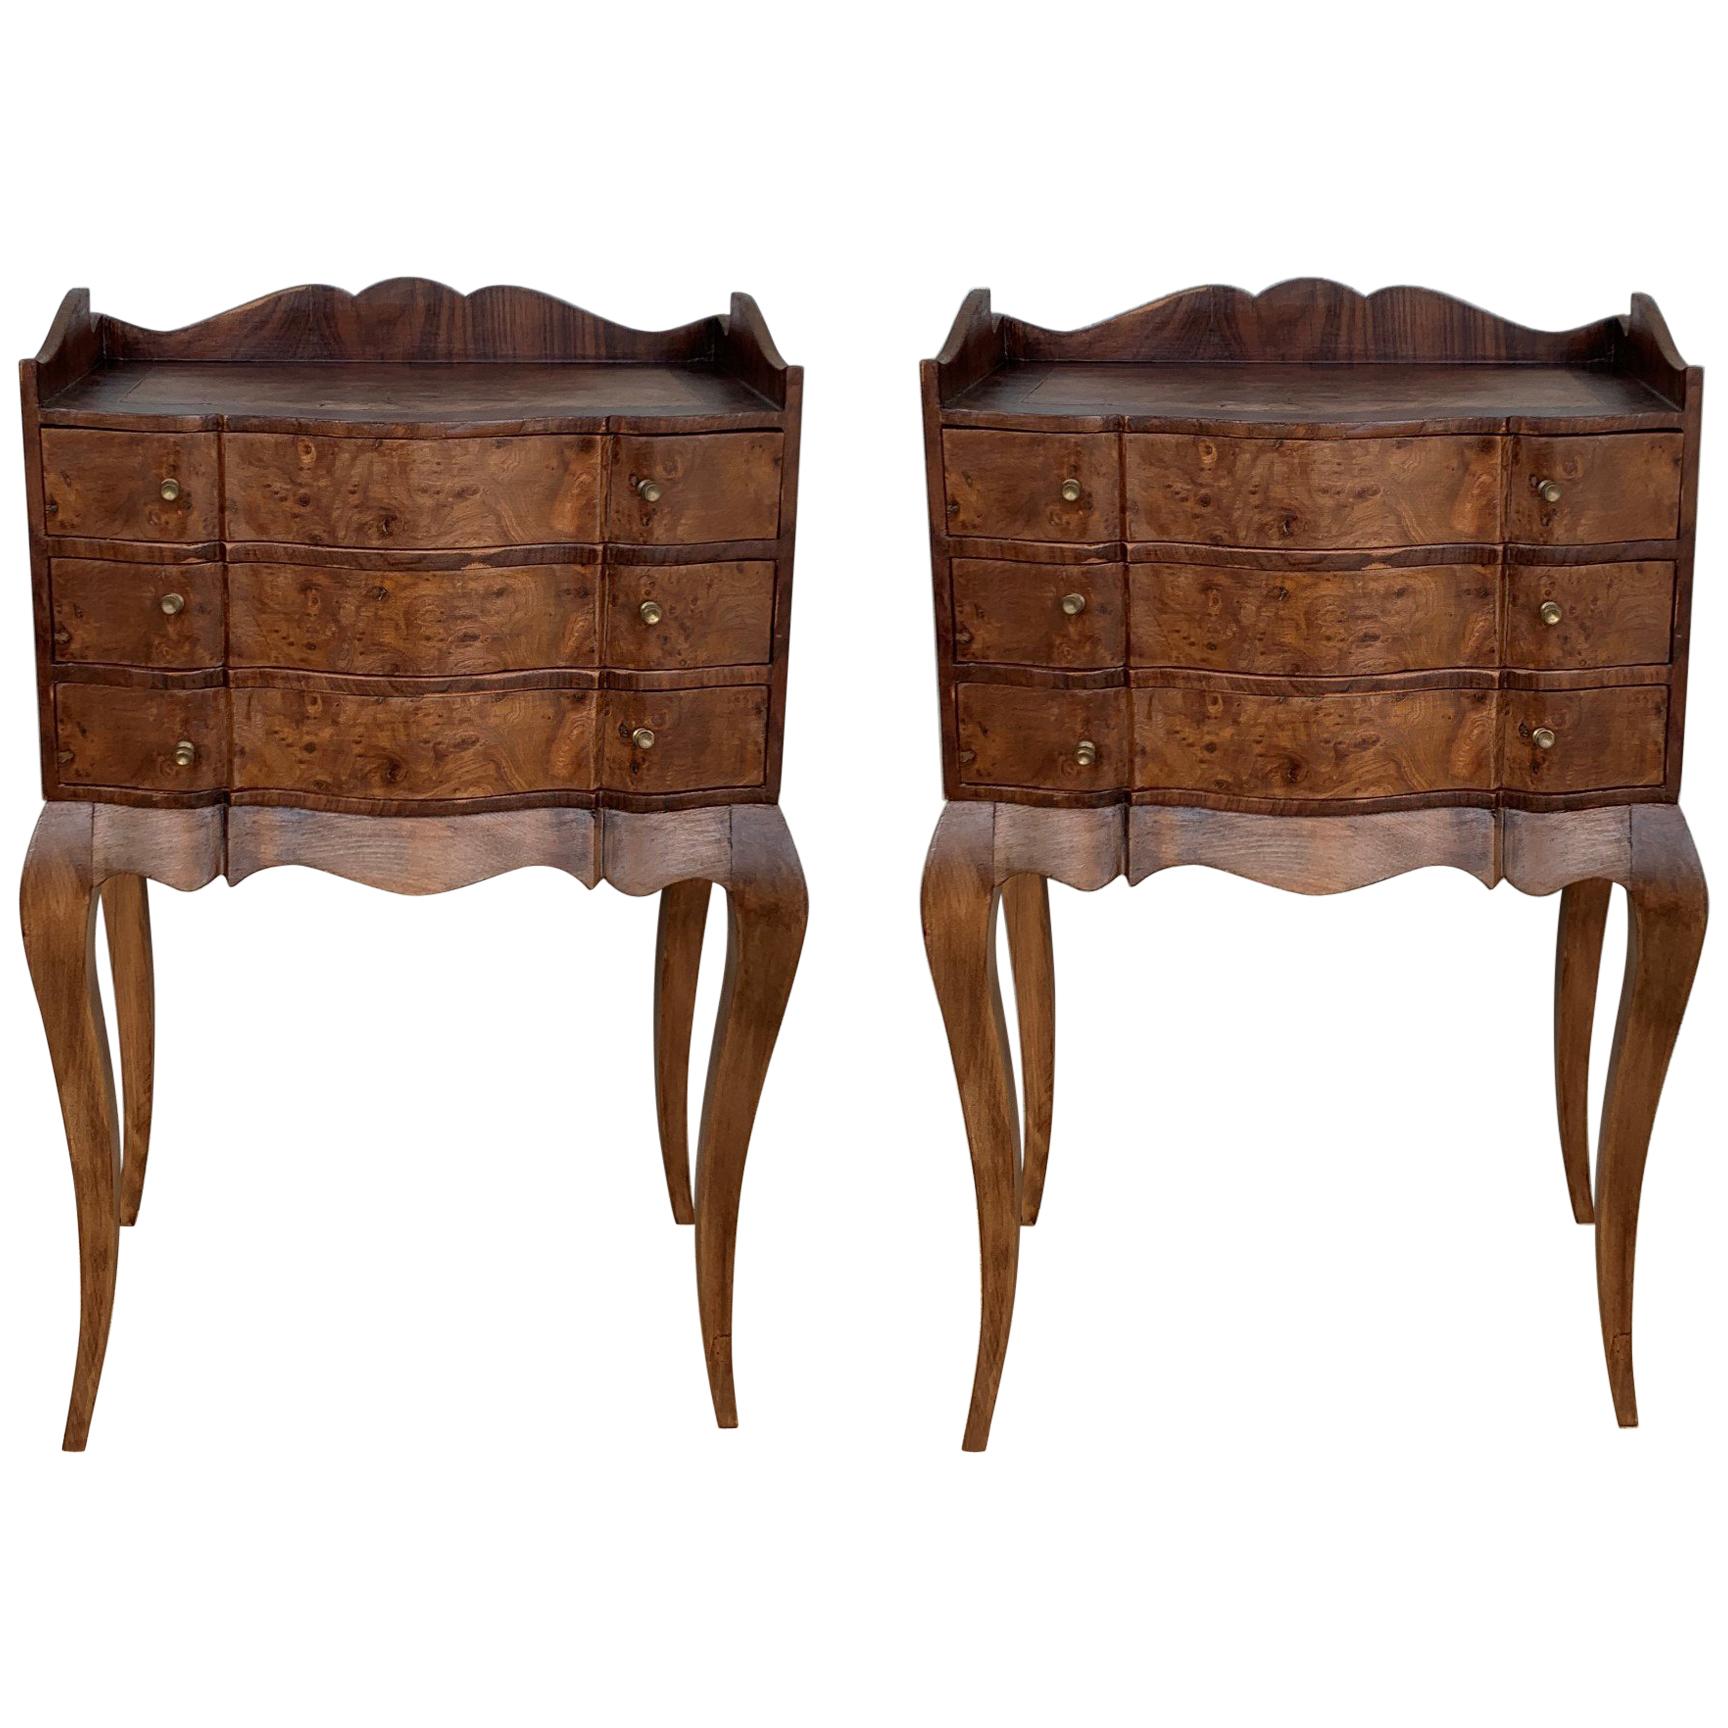 Pair of French Louis XV Style Walnut Bedside Tables with Drawers